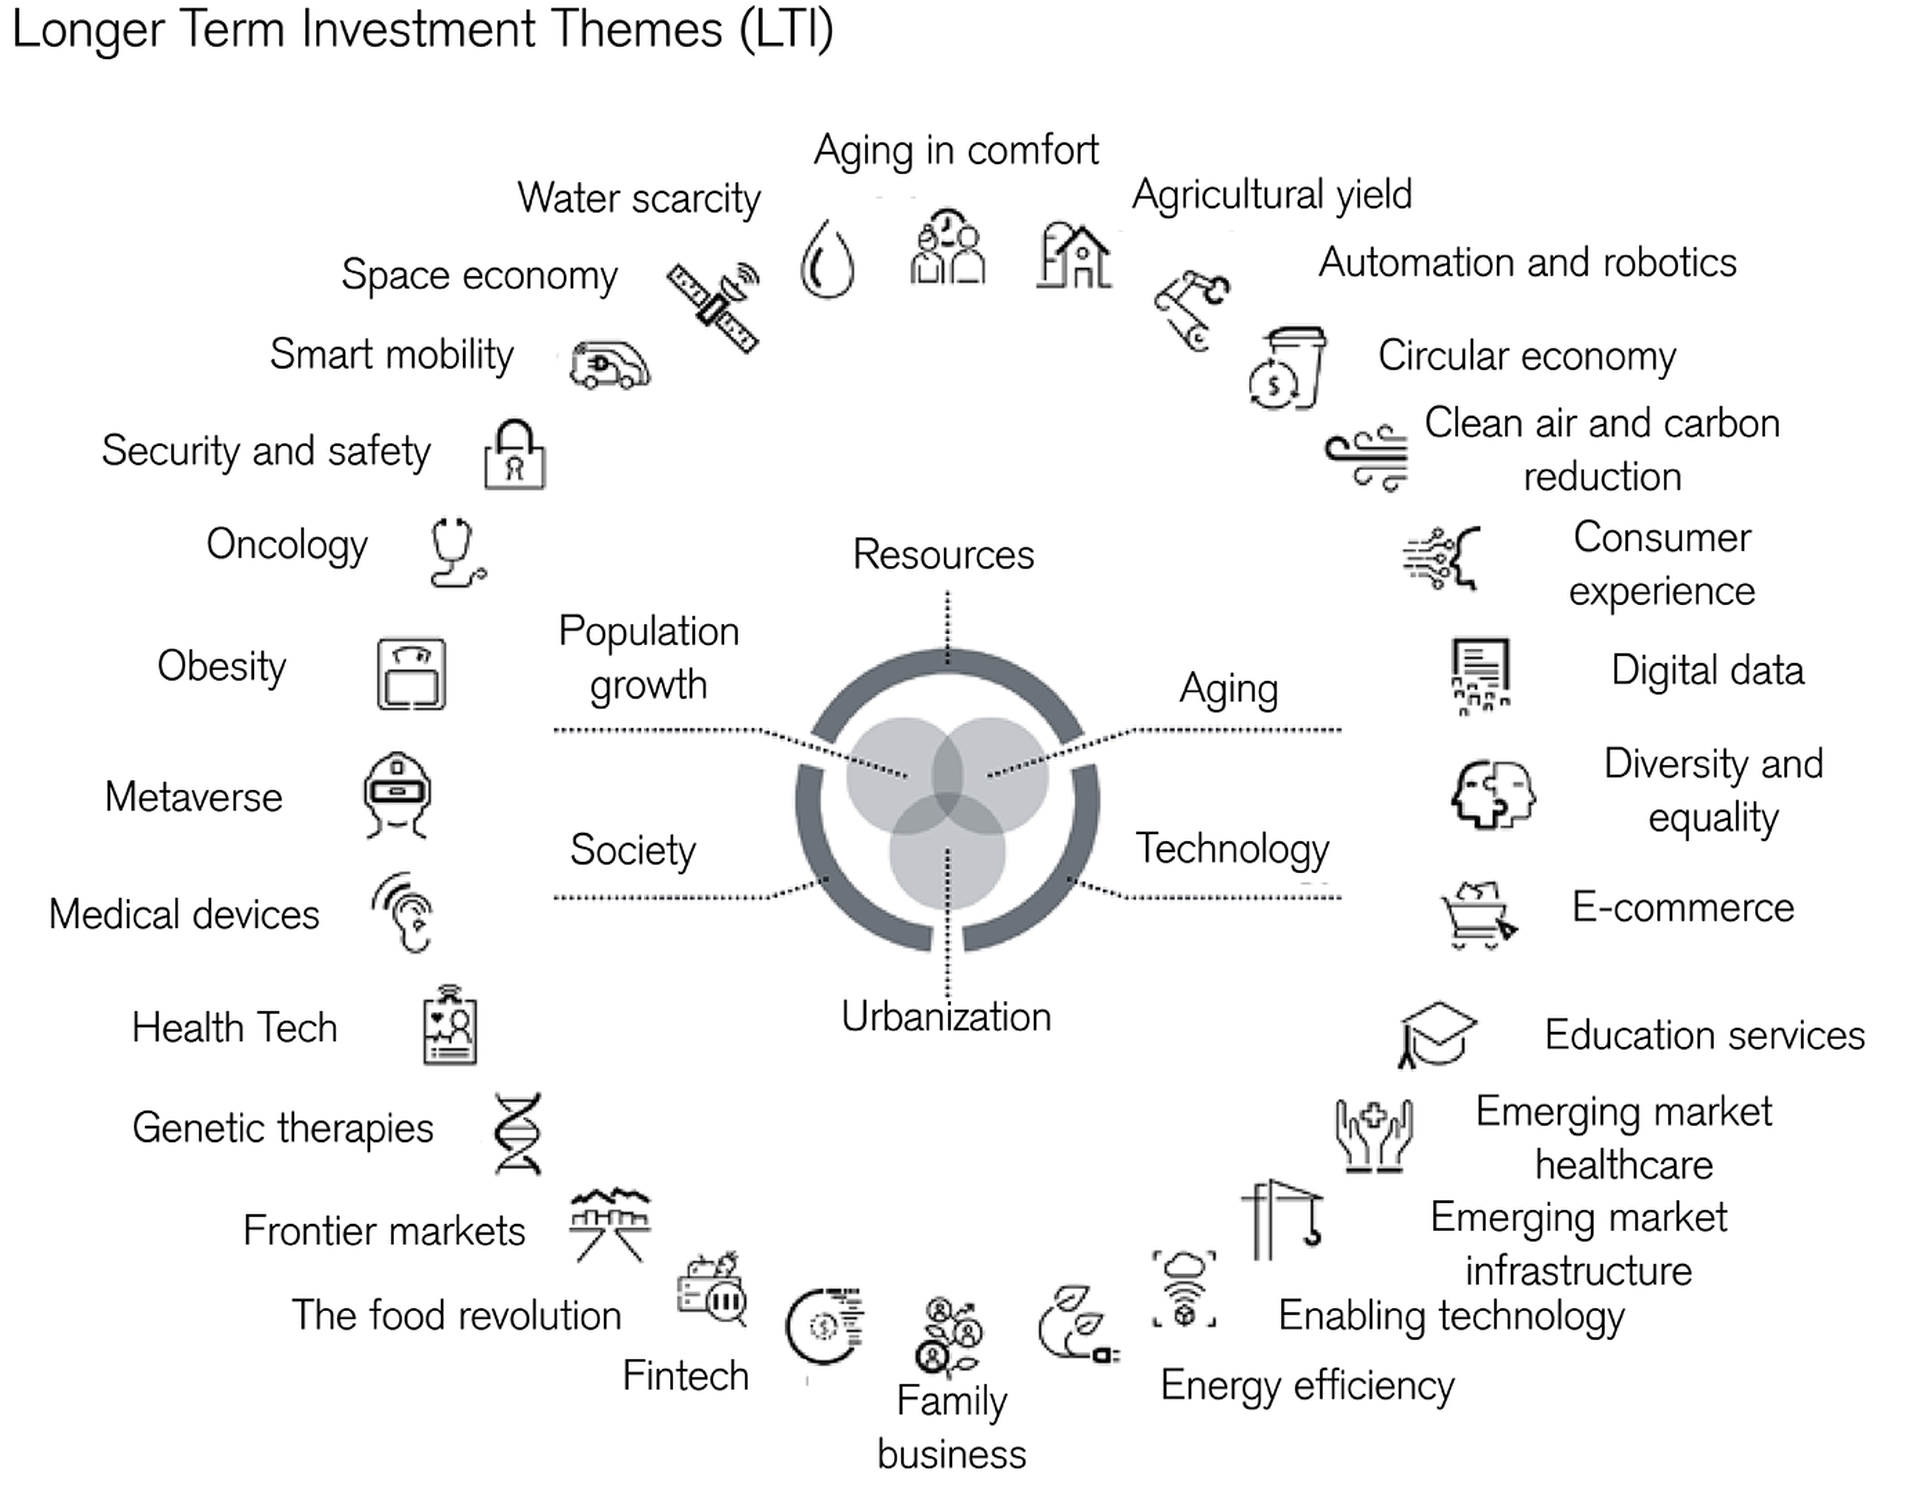 Economy: Long-term investment themes